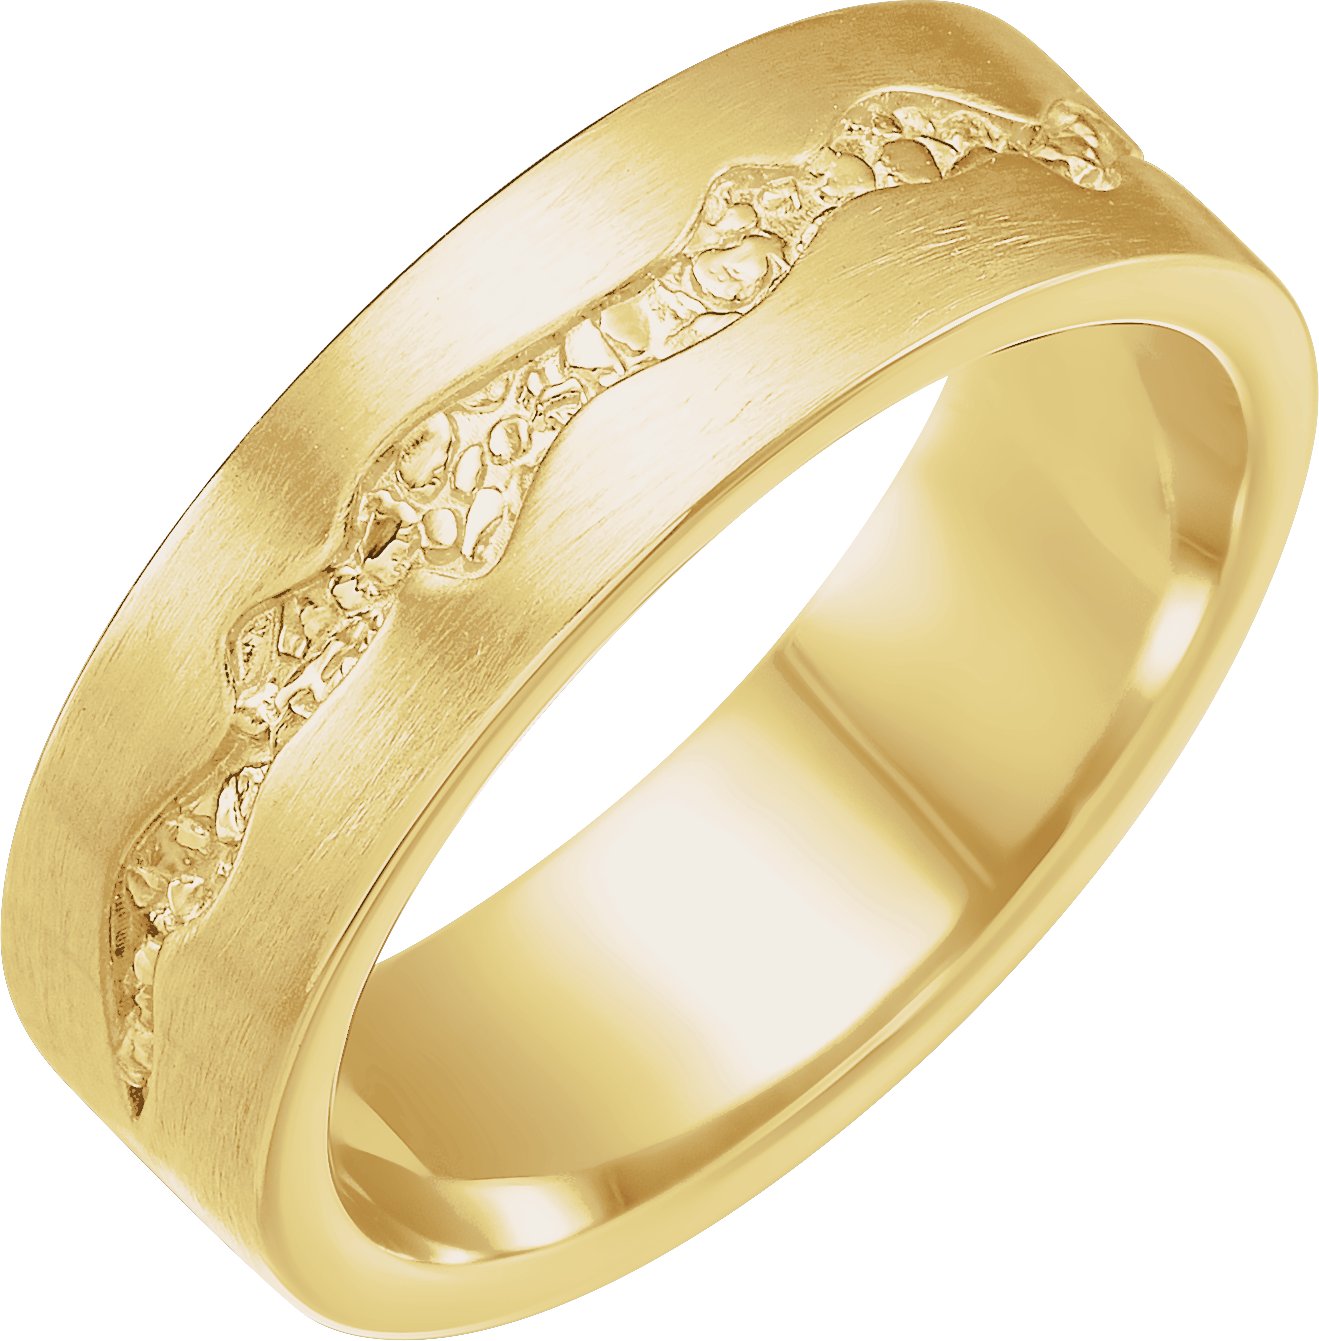 14K Yellow 6 mm Nugget Pattern Band with Satin Finish Size 9.5